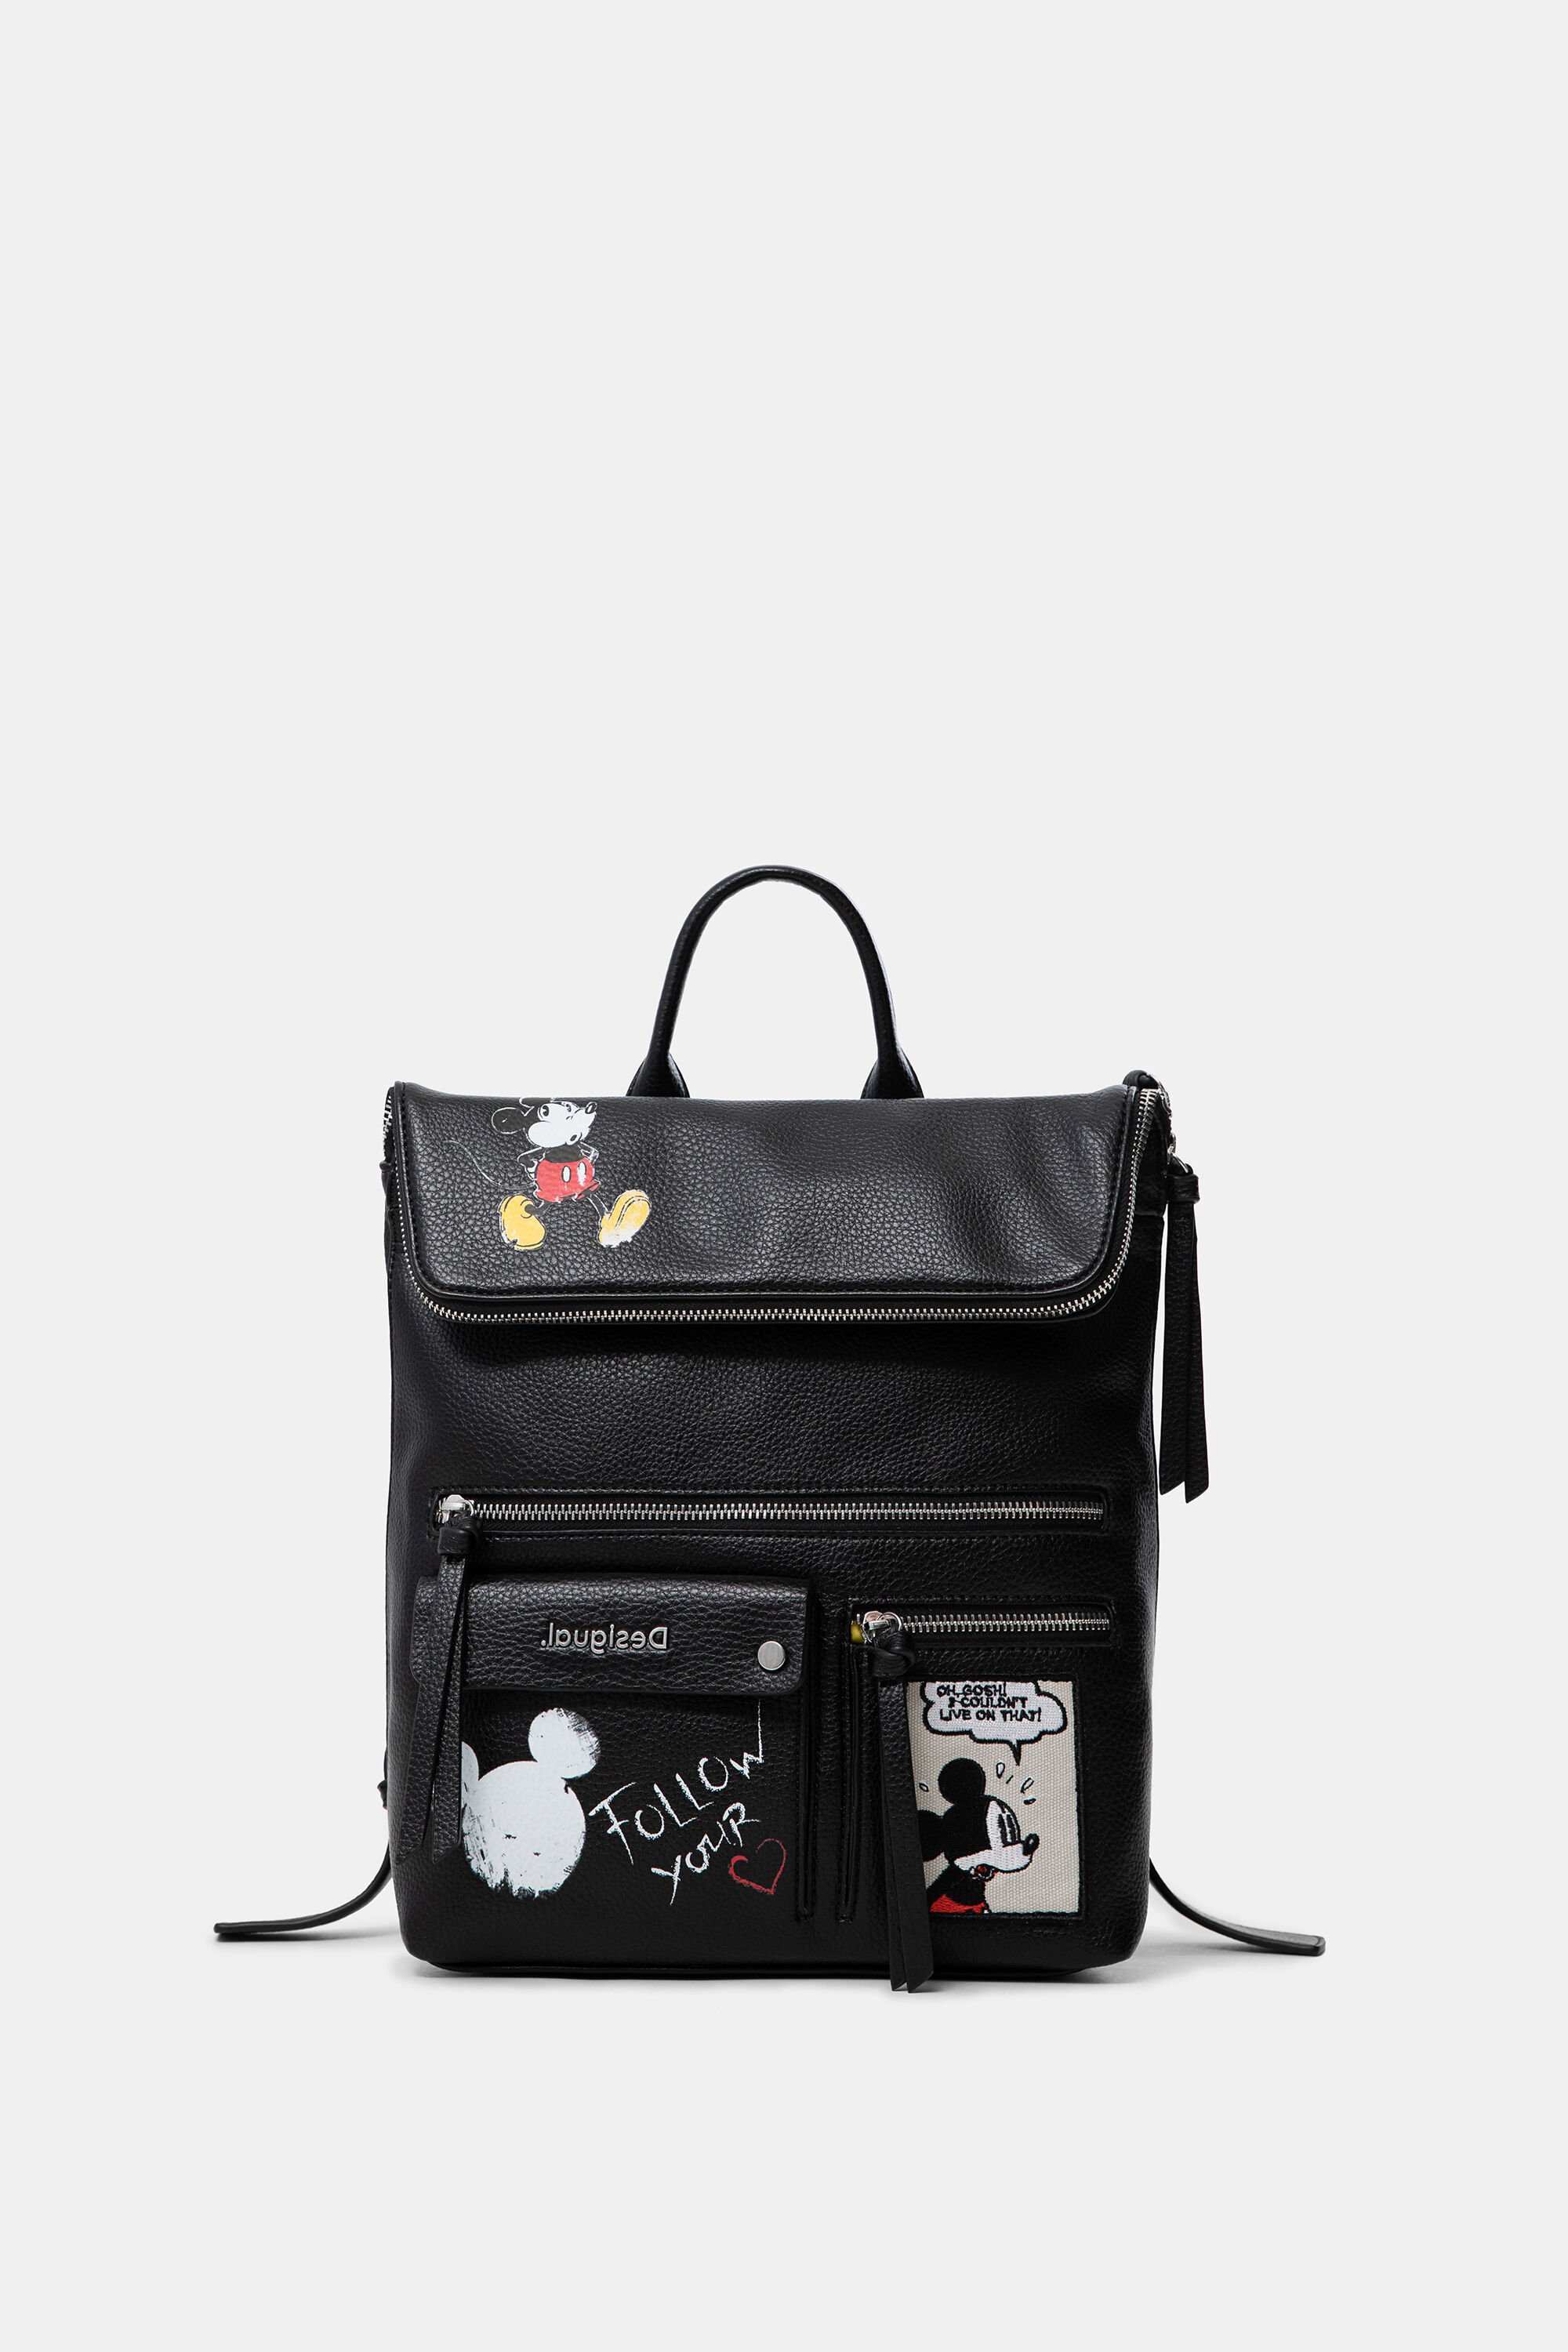 black and white mickey mouse backpack